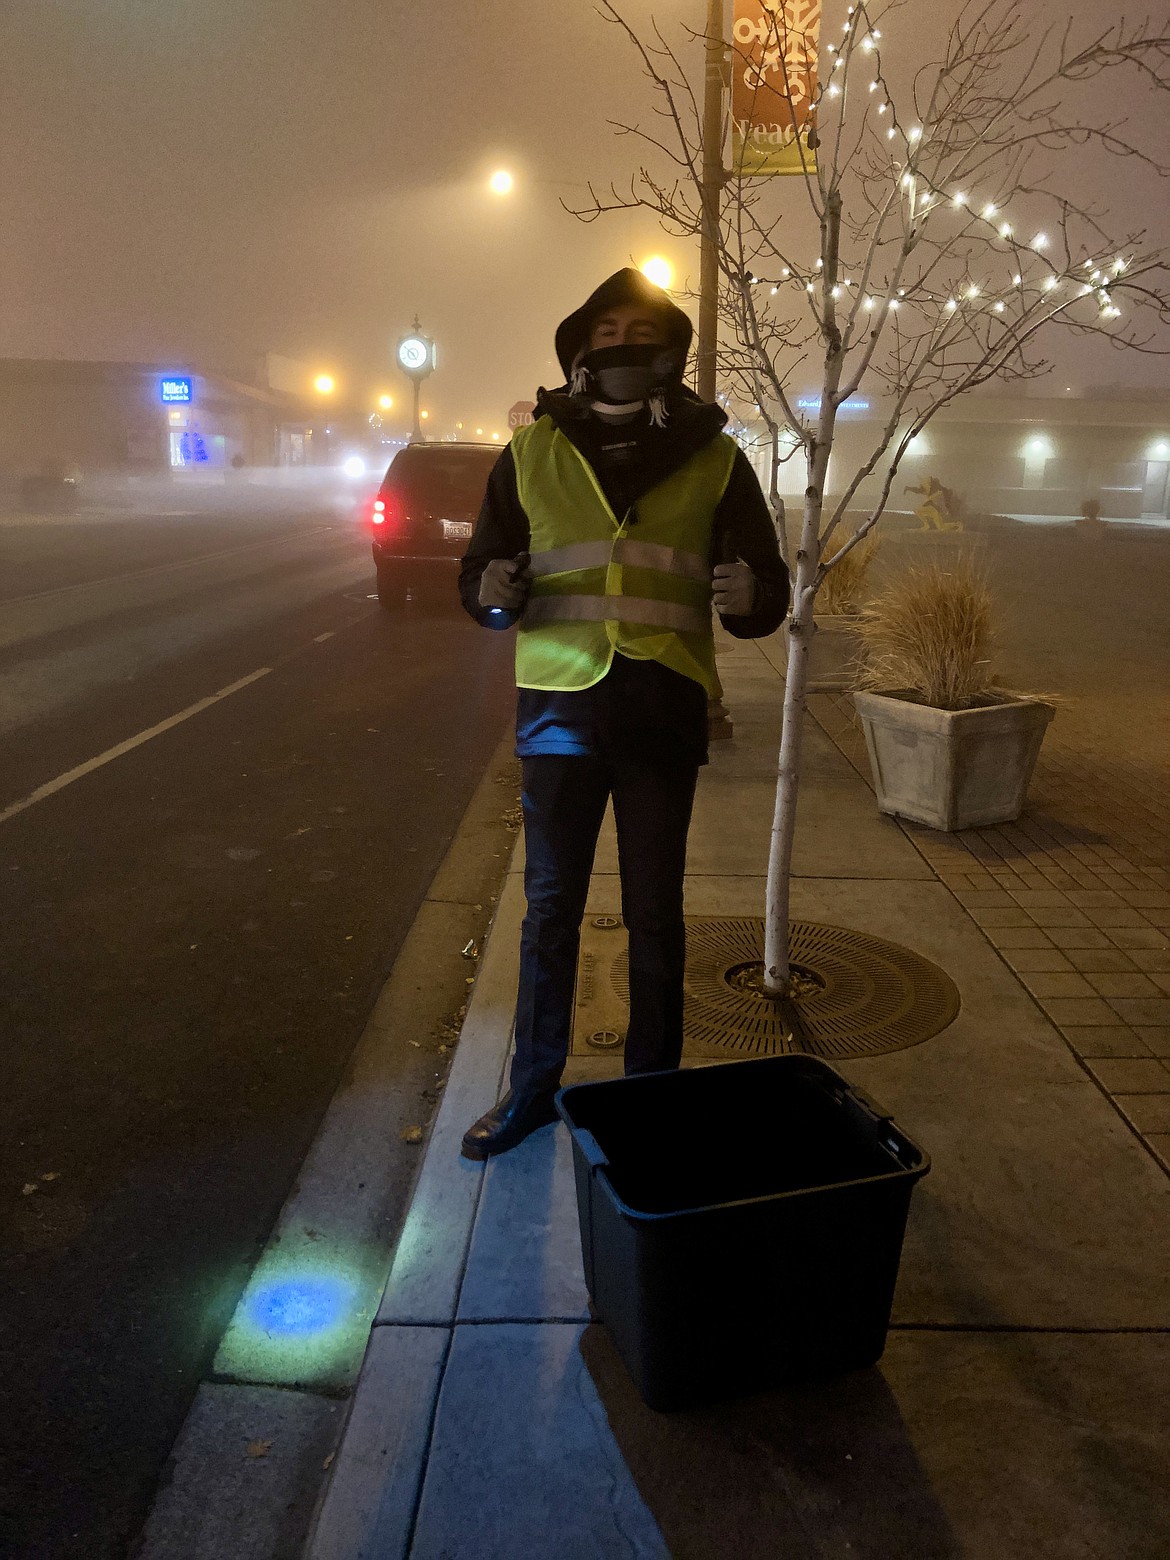 Connor Christiansen, a missionary with the Church of Jesus Christ of Latter-day Saints, stands in Sinkiuse Square Friday evening ready to take donations of food, clothing and toys as part of the Light Up Moses Lake contest and fundraiser.